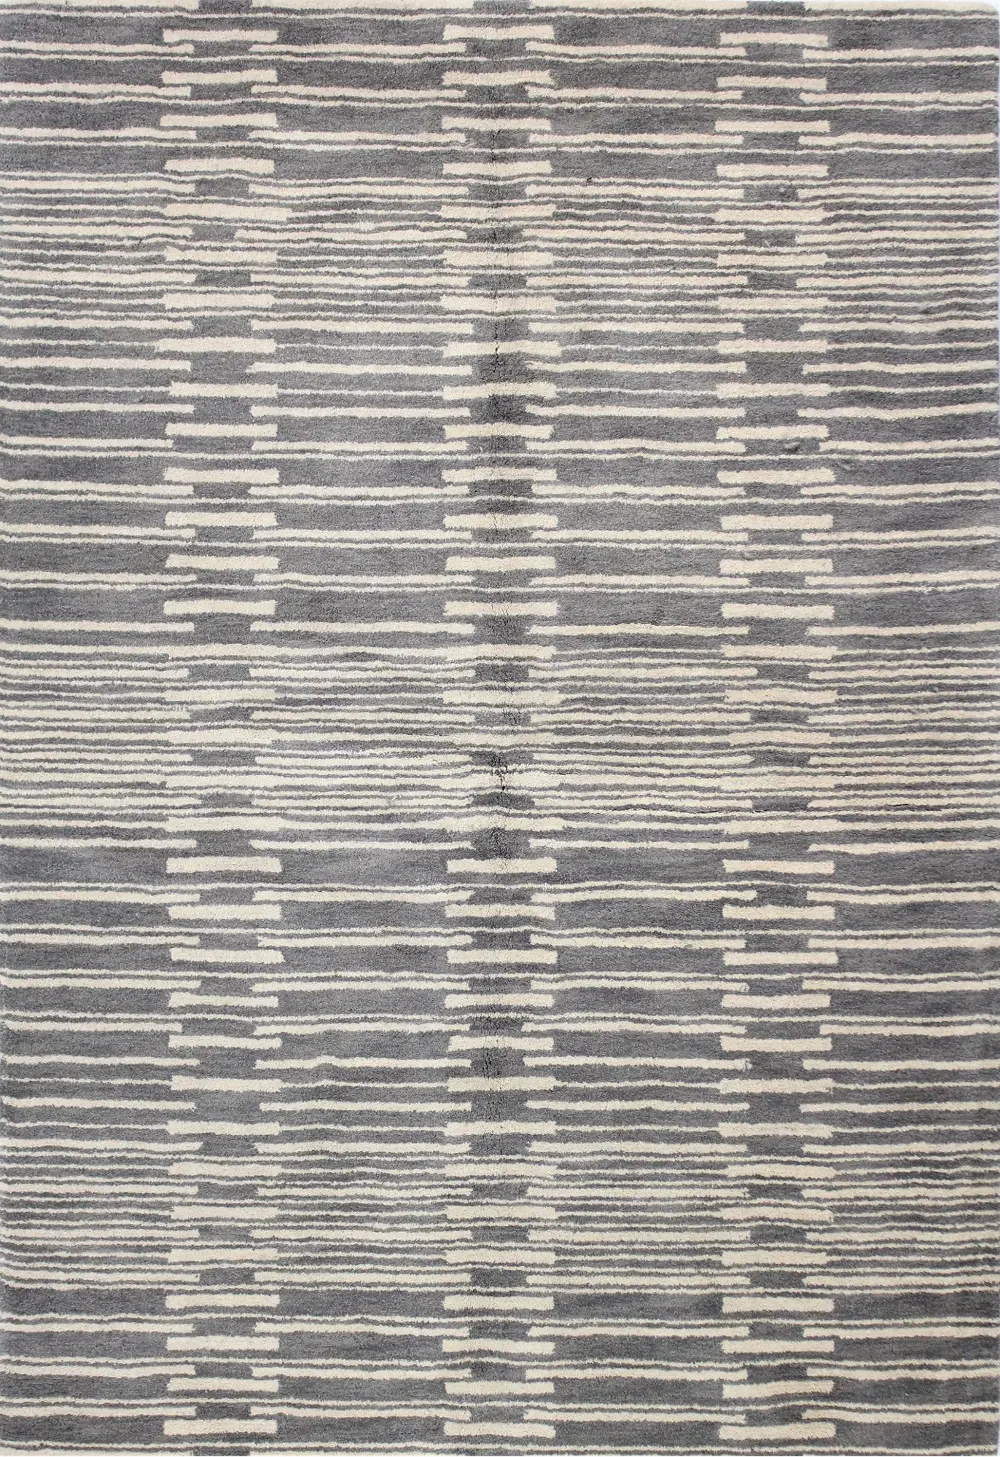 S185-GY-8X10-ST264 8 x 10 Large Contemporary Princeton Gray Area Rug - Chelsea-1